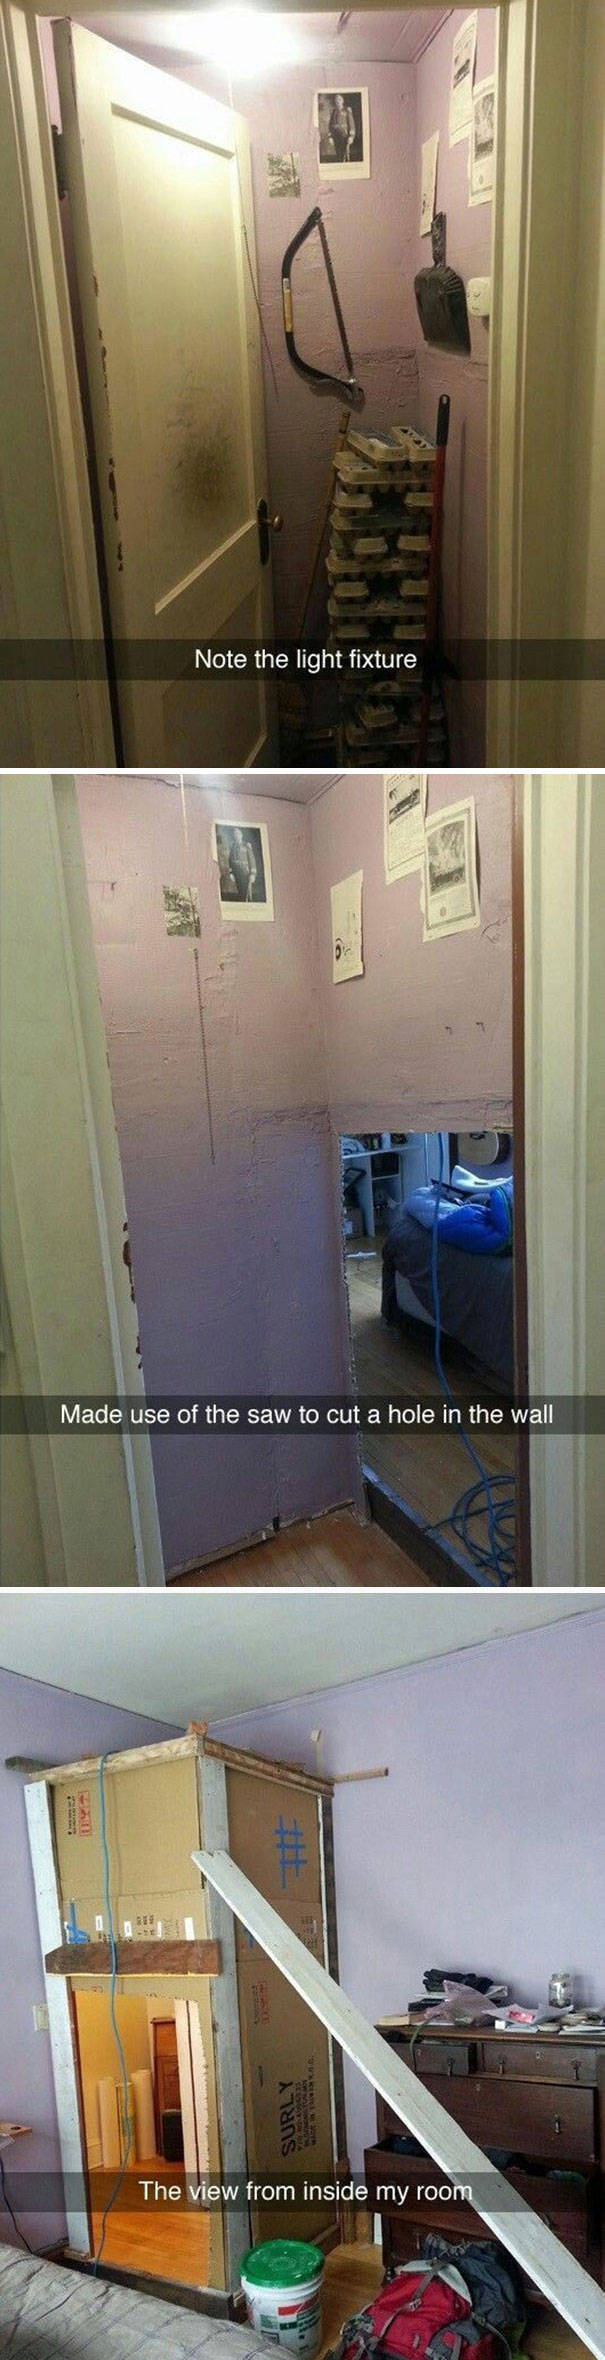 funny roommate pranks - Note the light fixture Made use of the saw to cut a hole in the wall Surly The view from inside my room